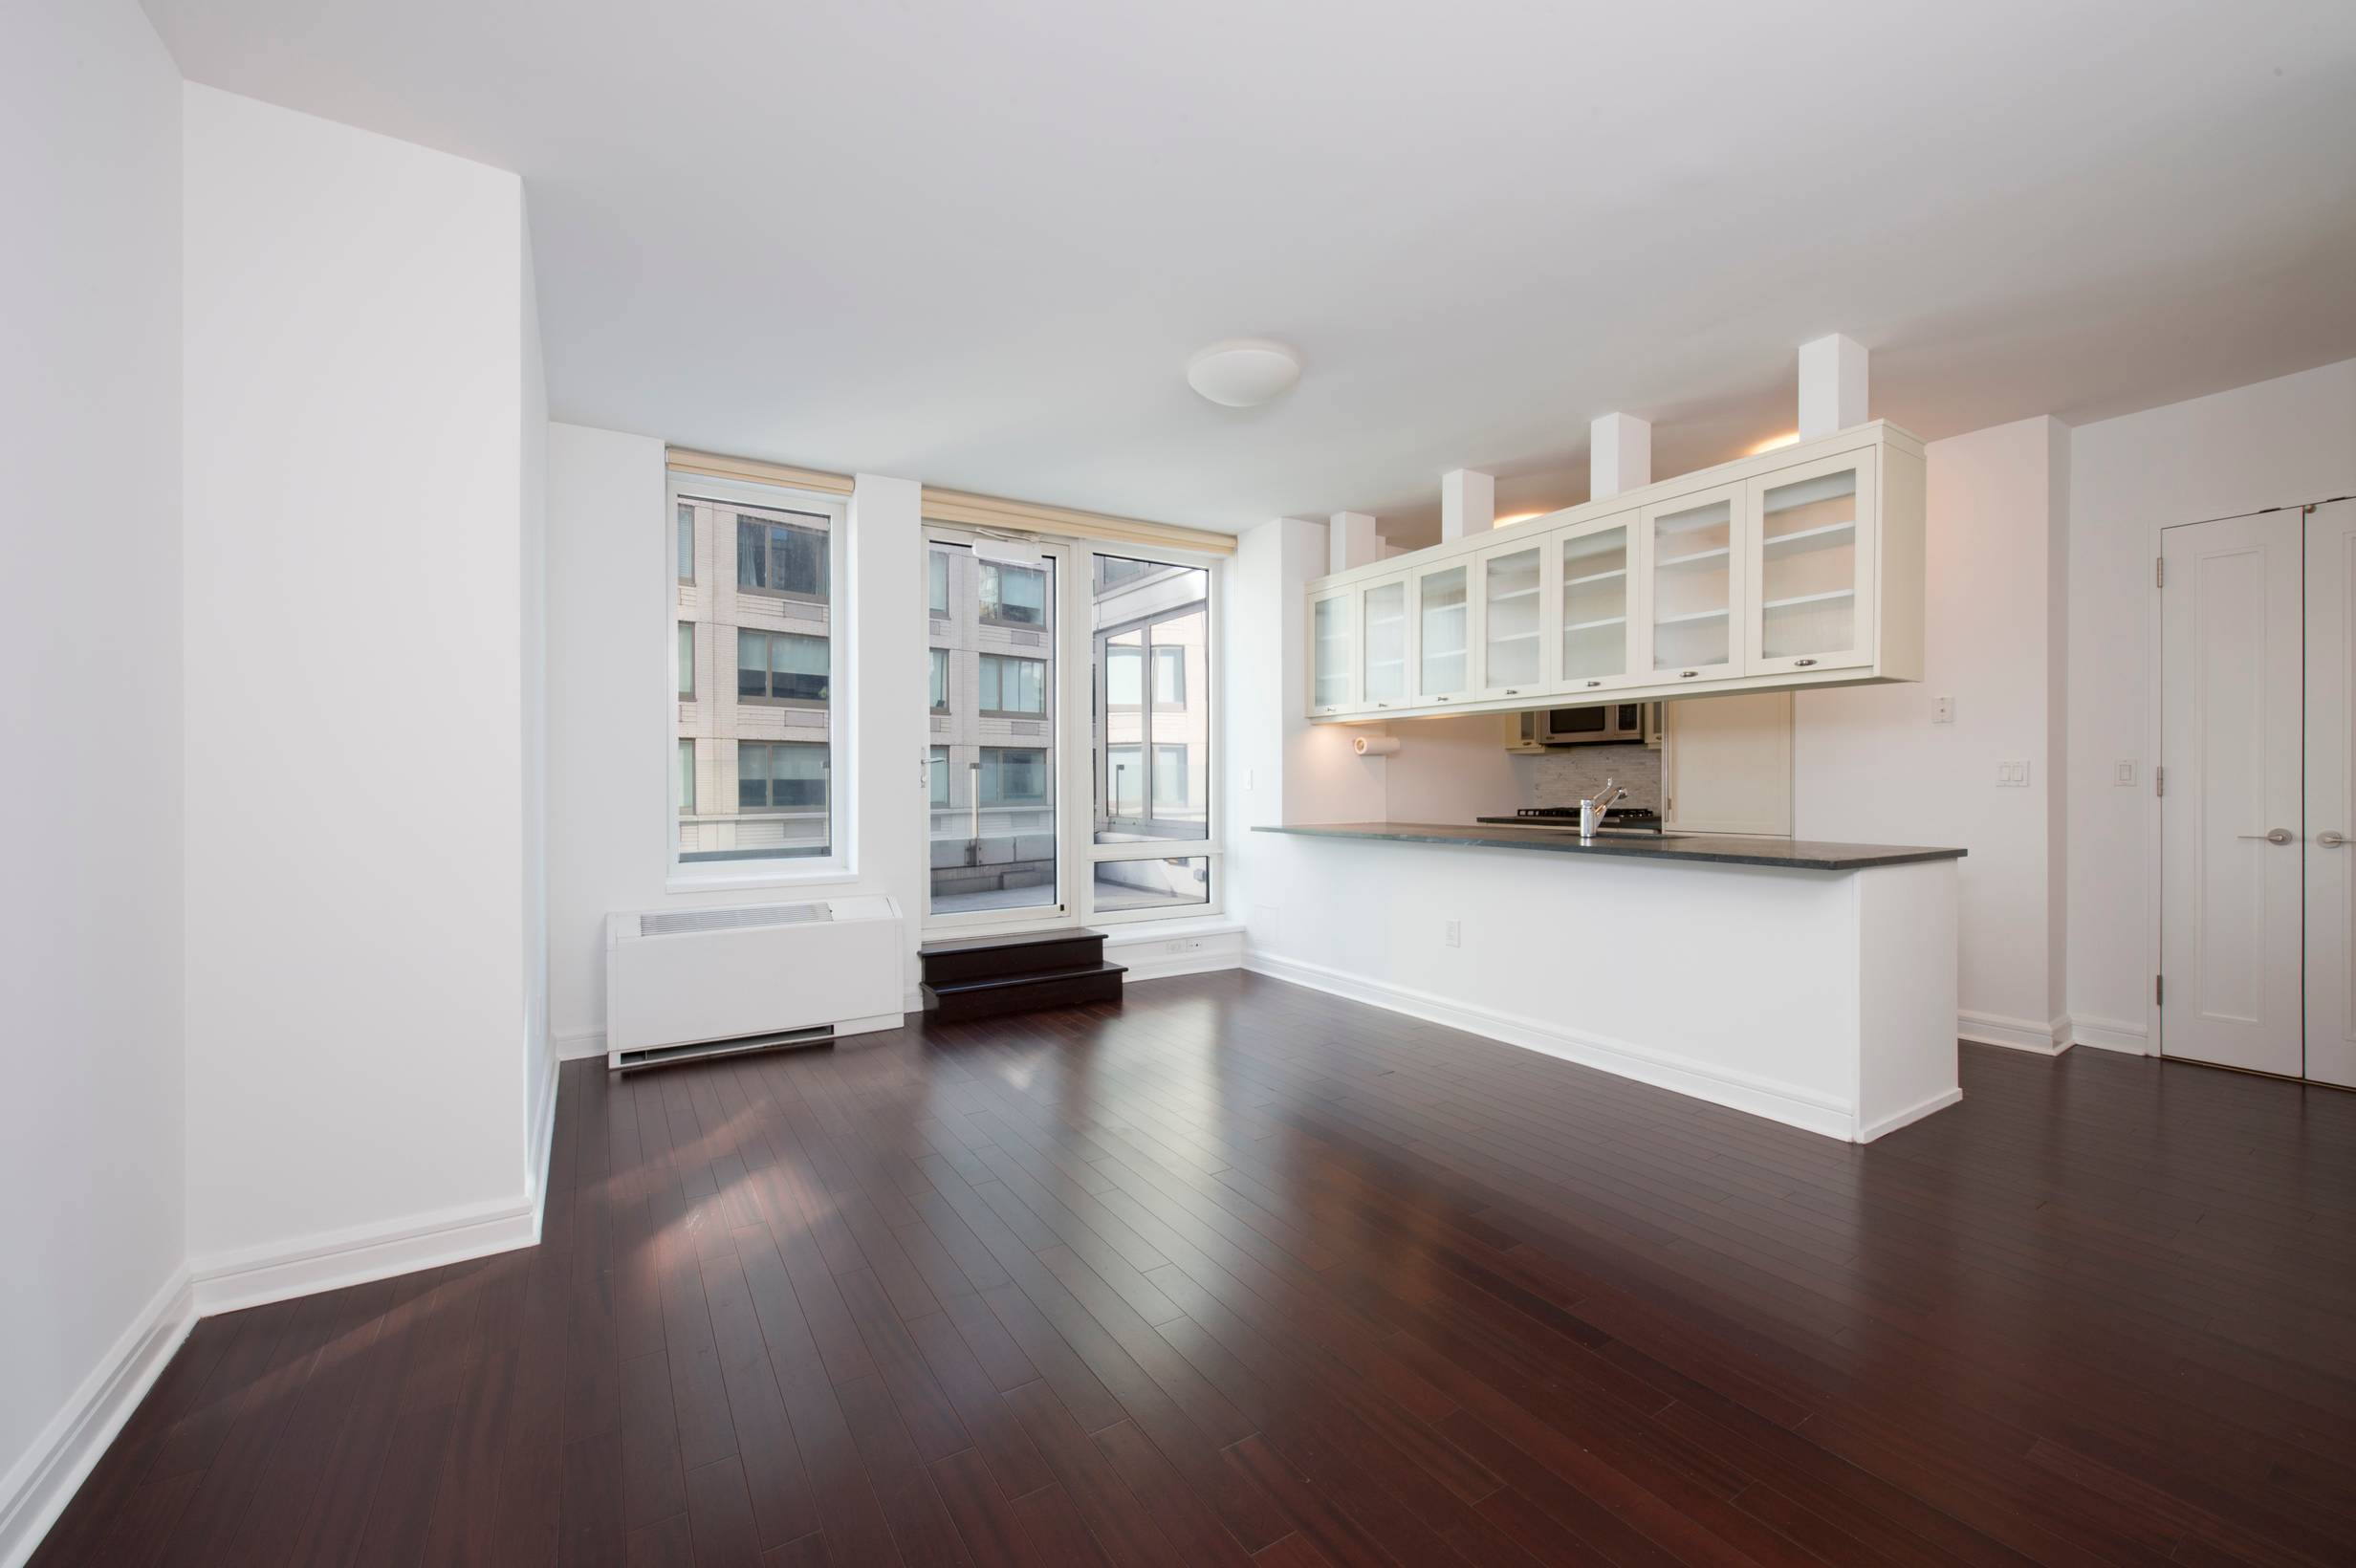 Upper West Side, Luxury Condo-Rental, The Rushmore, One Bedroom, One Bath with a Giant Balcony